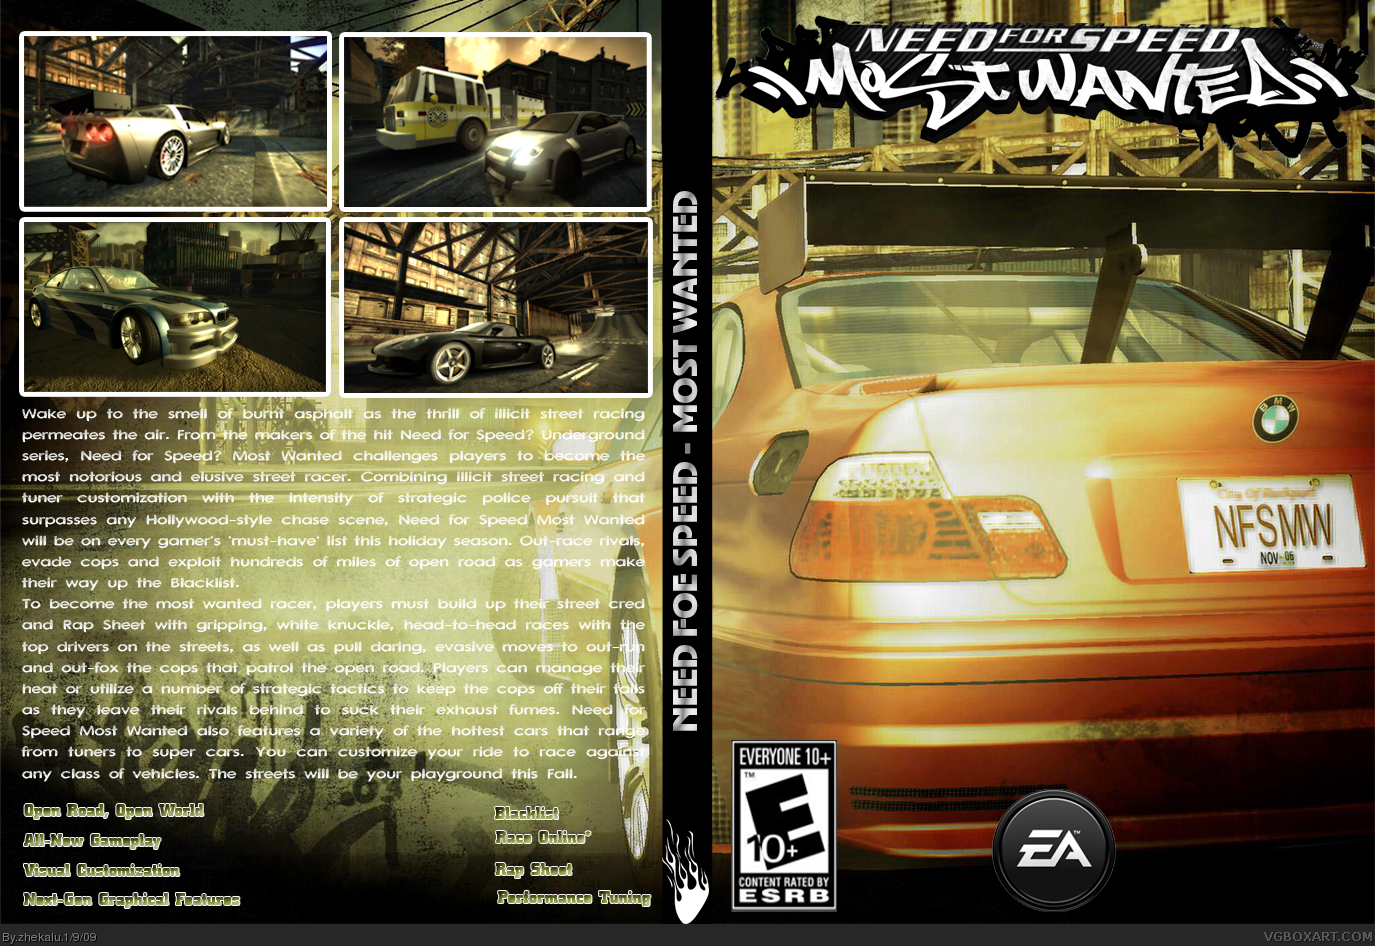 Nfs most wanted стим фото 99